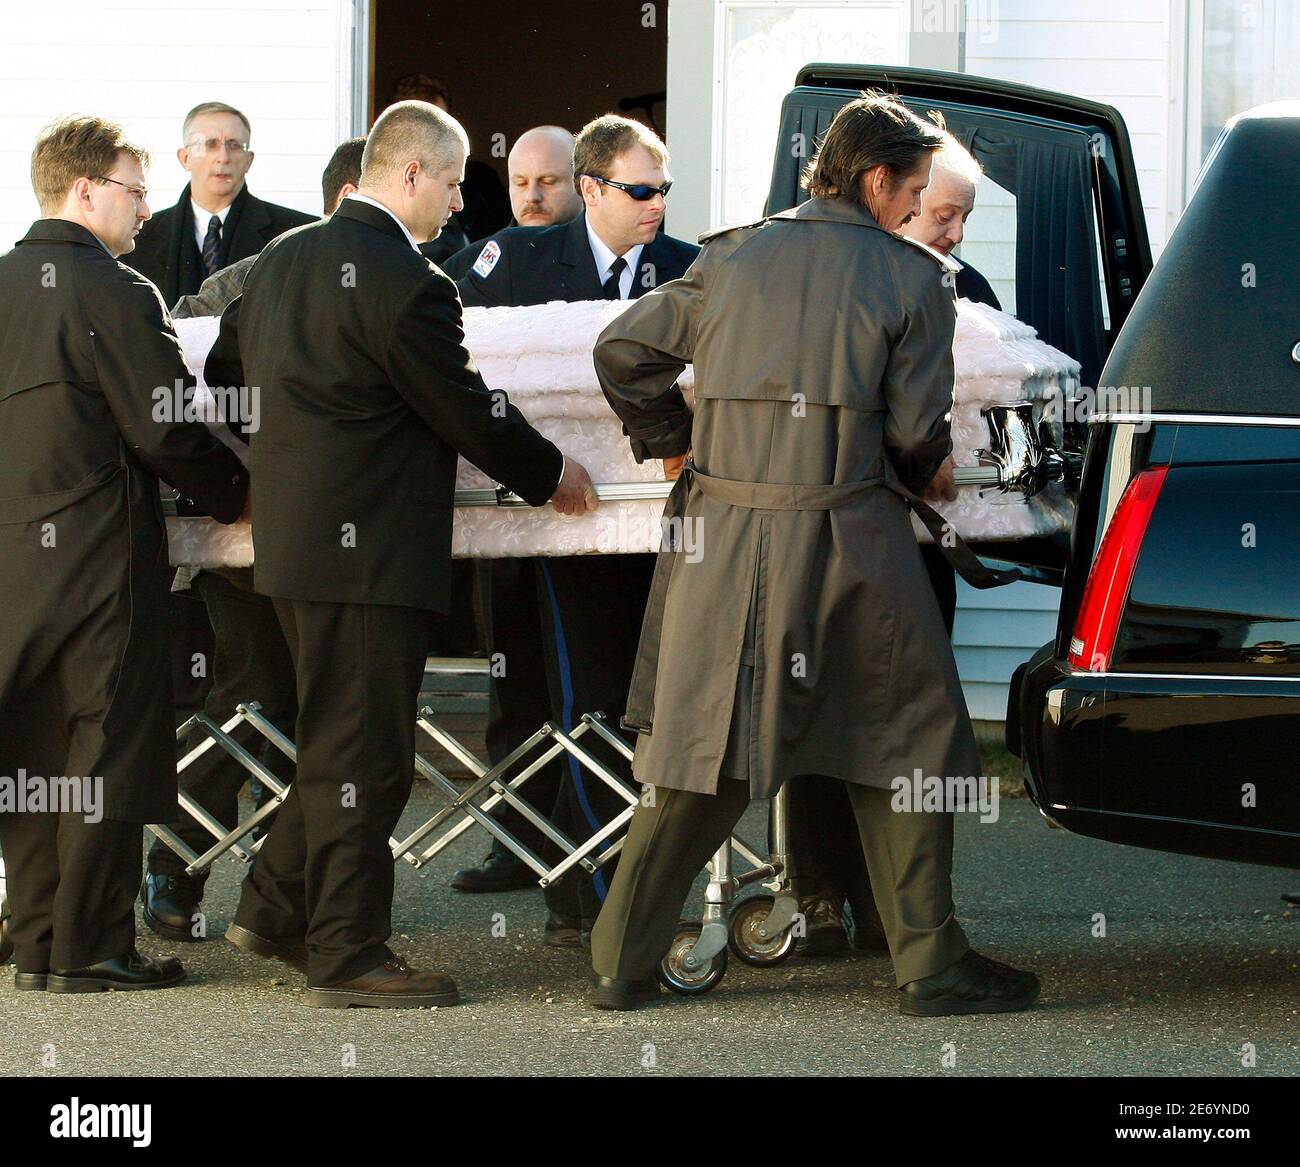 The coffin containing the remains of 12 year-old Karissa Boudreau is carried to a hearse at a funeral home in Barrington, Nova Scotia, February 19, 2008. The grade 6 student's body was discovered February 9 along the banks of the LaHave river near the town of Bridgewater. Royal Canadian Mounted Police are calling her death a homicide.     REUTERS/Paul Darrow  (CANADA) Stock Photo